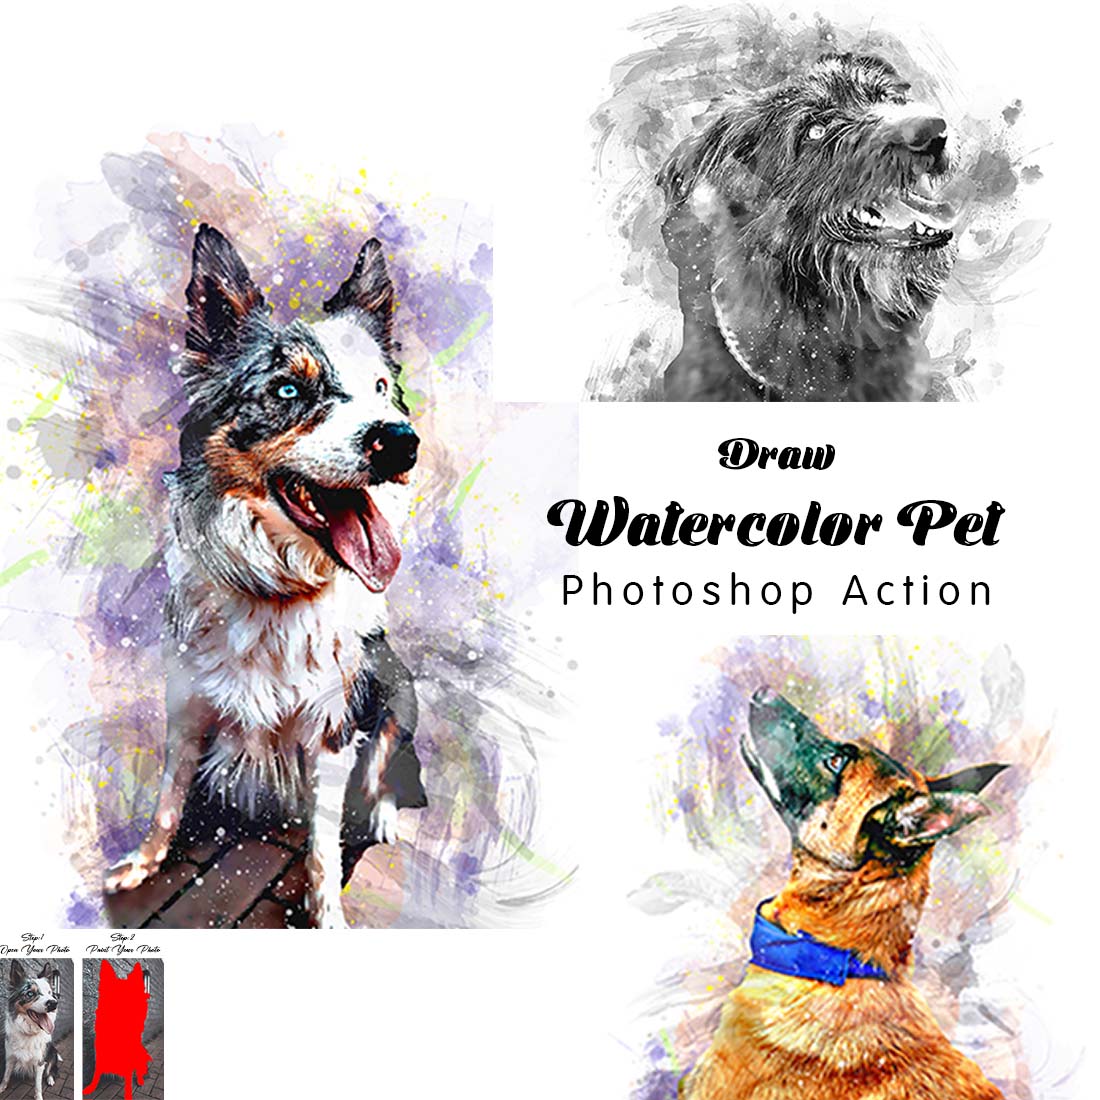 Draw Watercolor Pet Photoshop Action cover image.